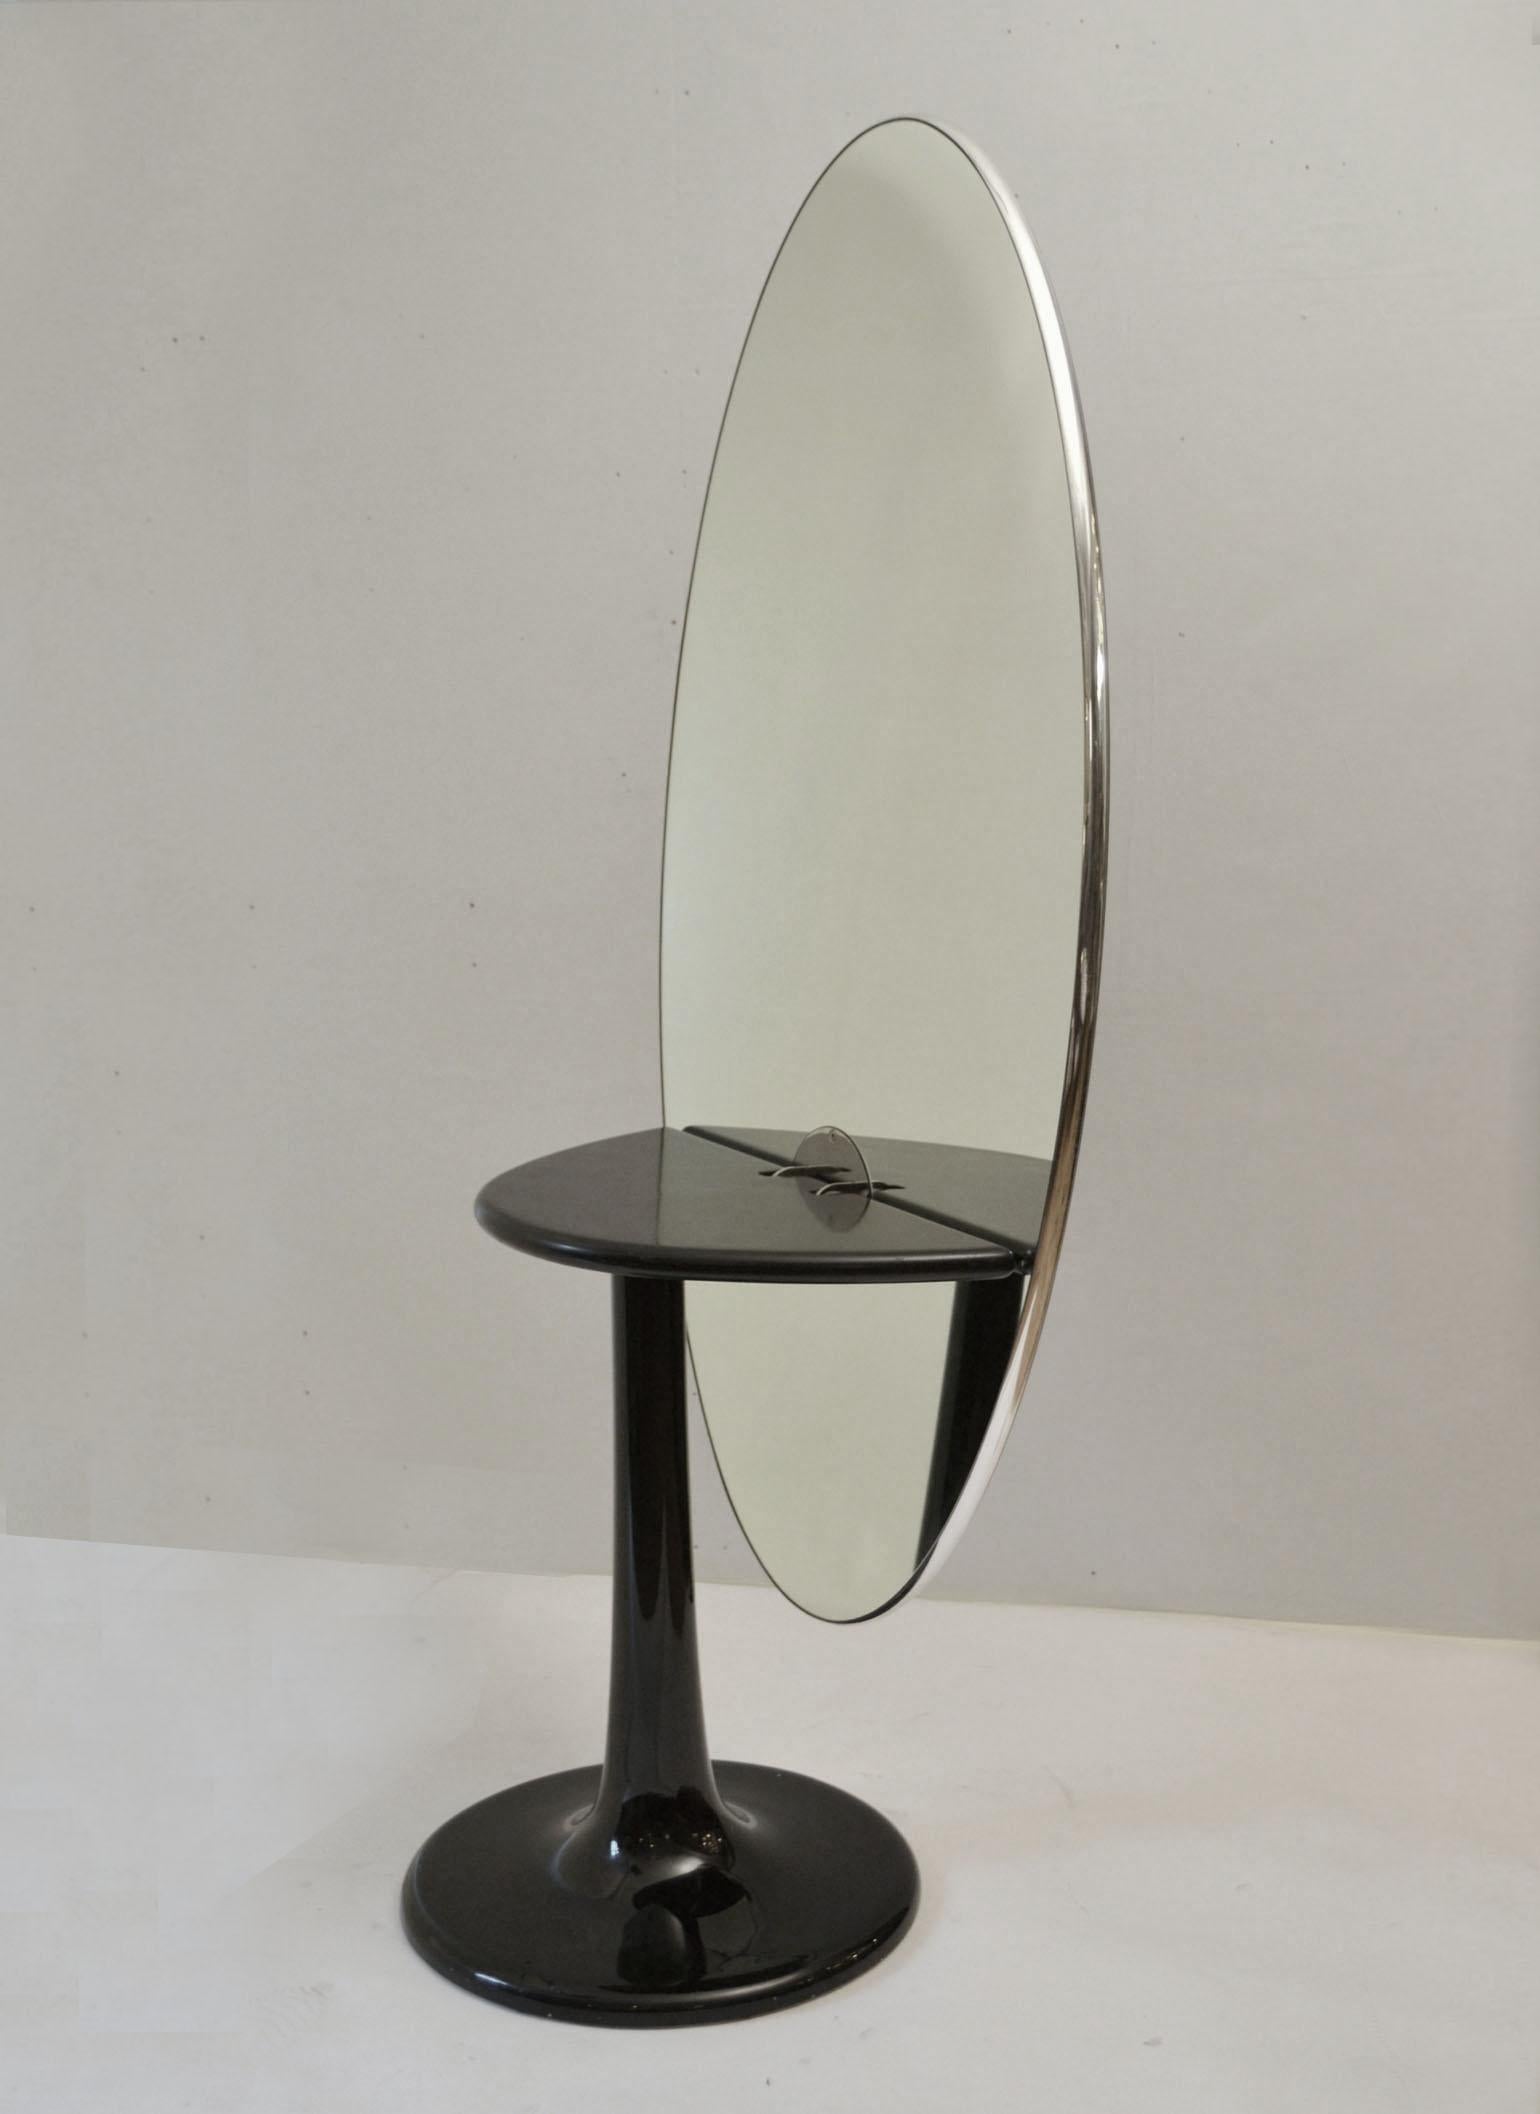 Extraordinary Mid-Century Modern sculptural oval table with a surprise; when the top is lifted up by a simple hand movement it reveals a vanity mirror. The black glass table top trimmed with a chromed edge that stands off center from its elliptical